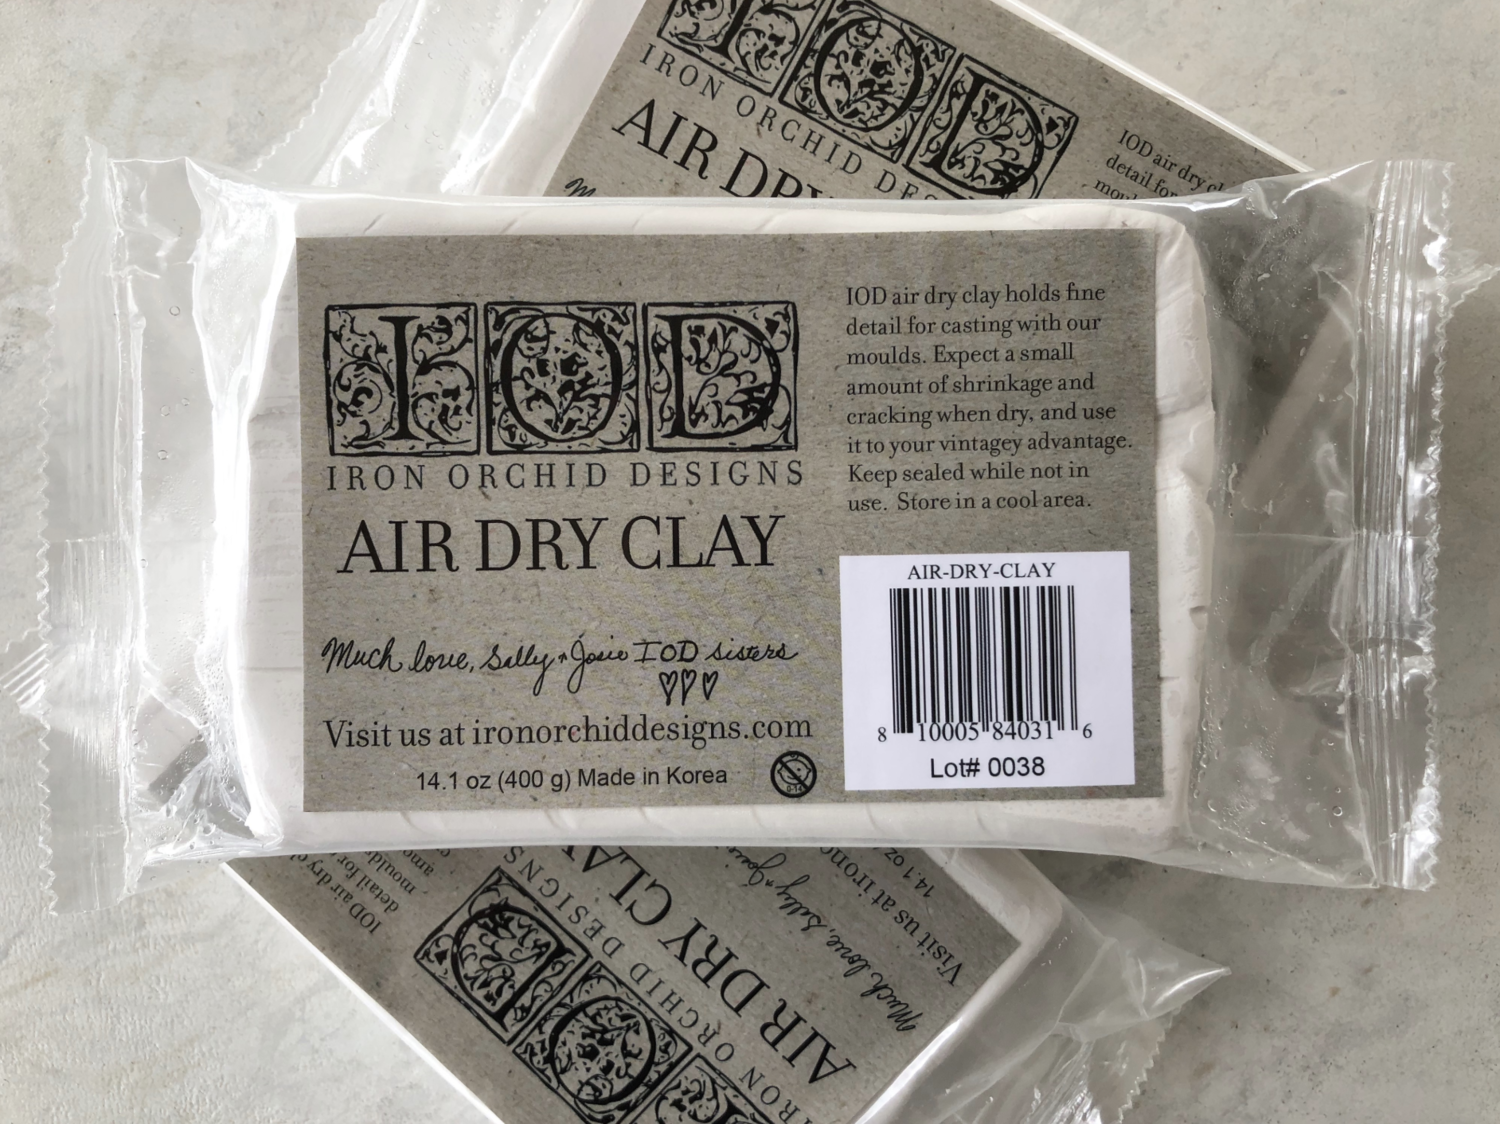 IOD AIR DRY CLAY Iron Orchid Designs